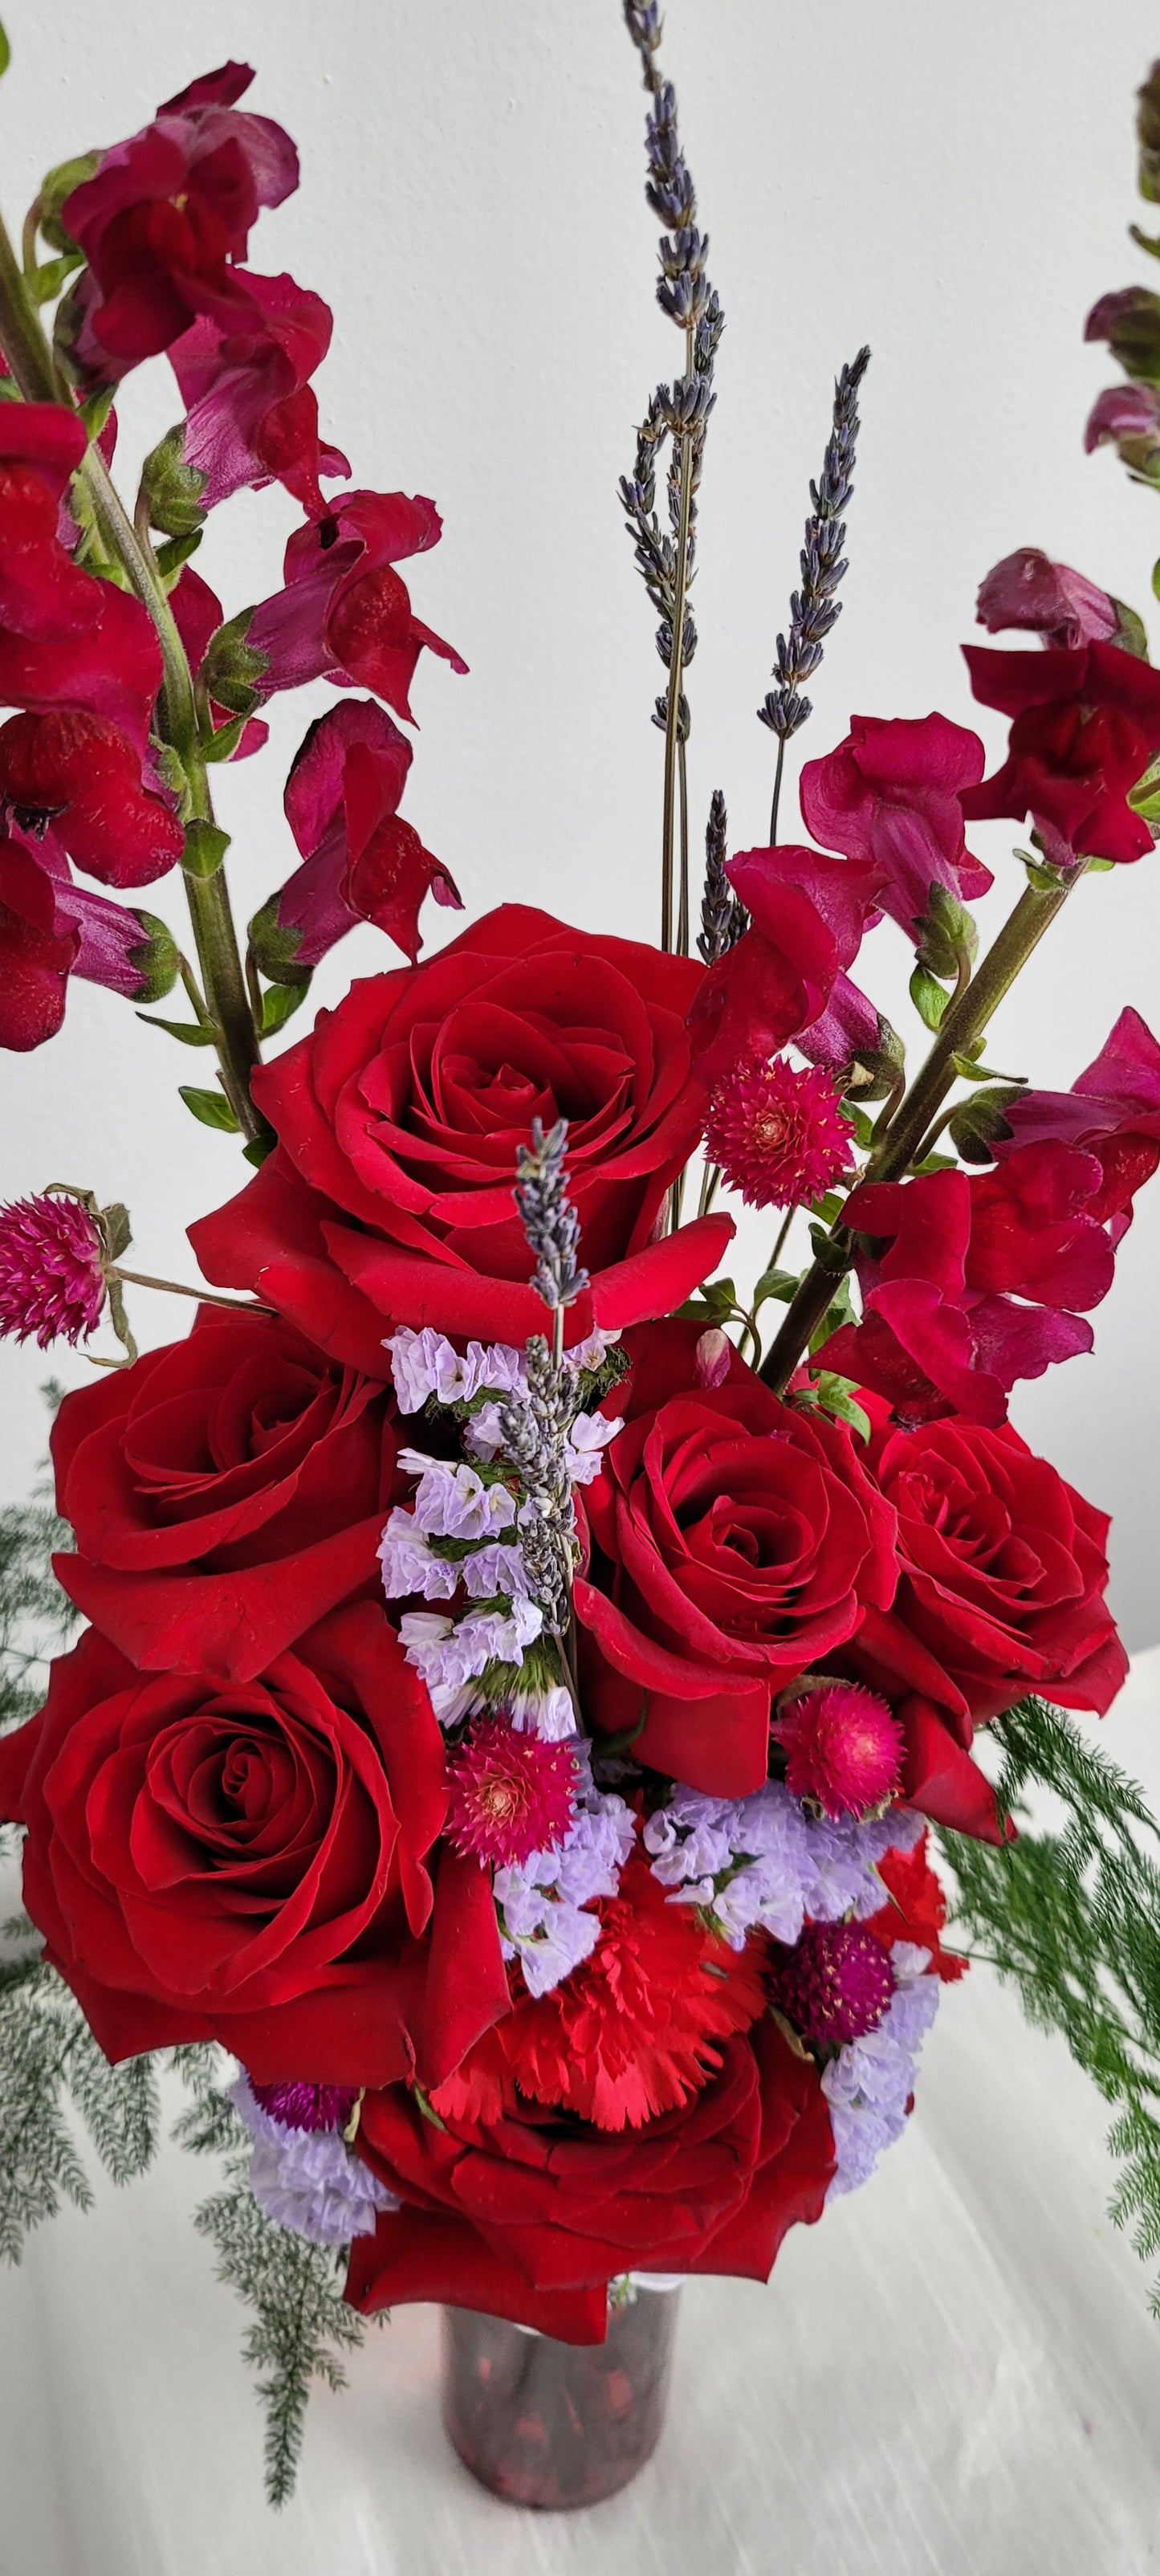 Red Roses for Pure Passion!